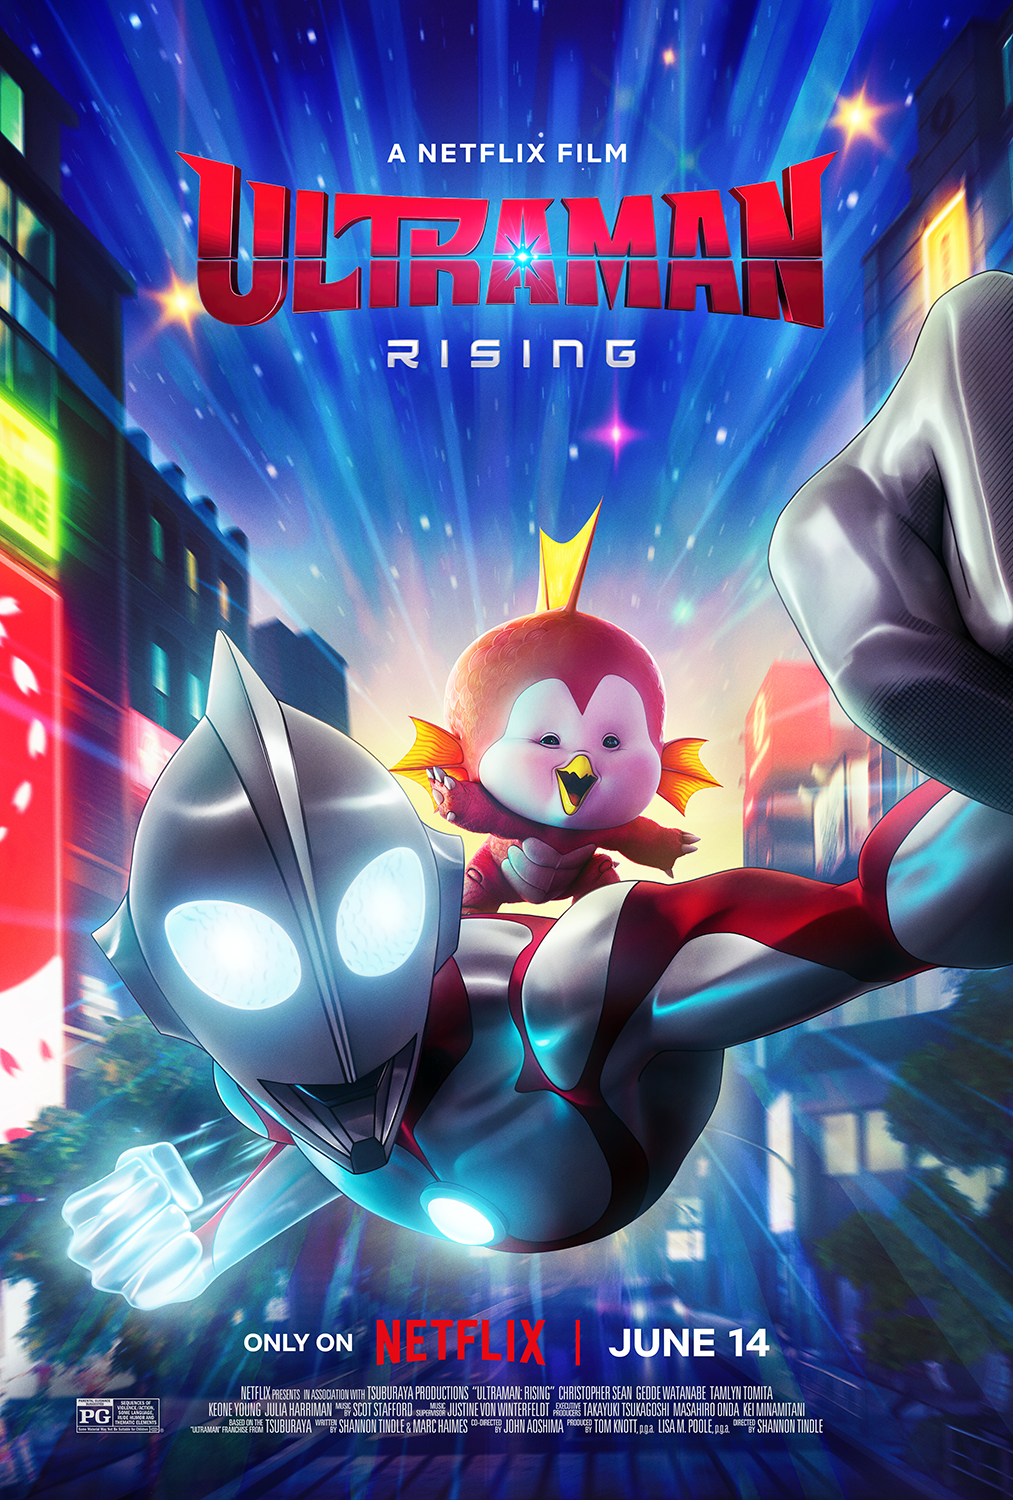 Ultraman Rising Poster Sets Release Date for Netflix Animated Movie